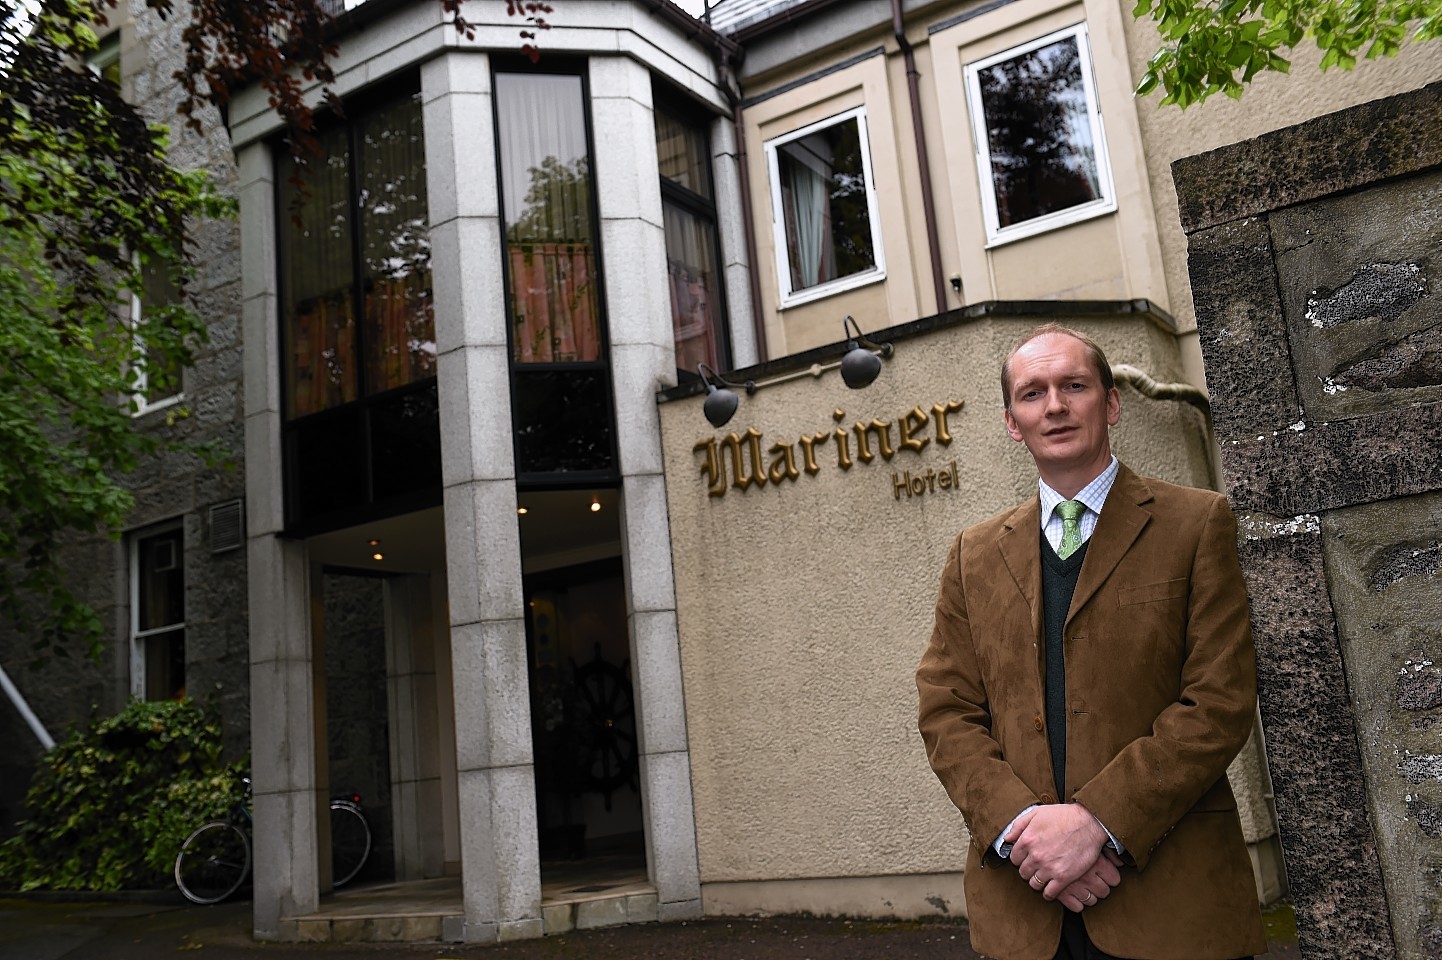 The Mariner Hotel owner Mike Edwards